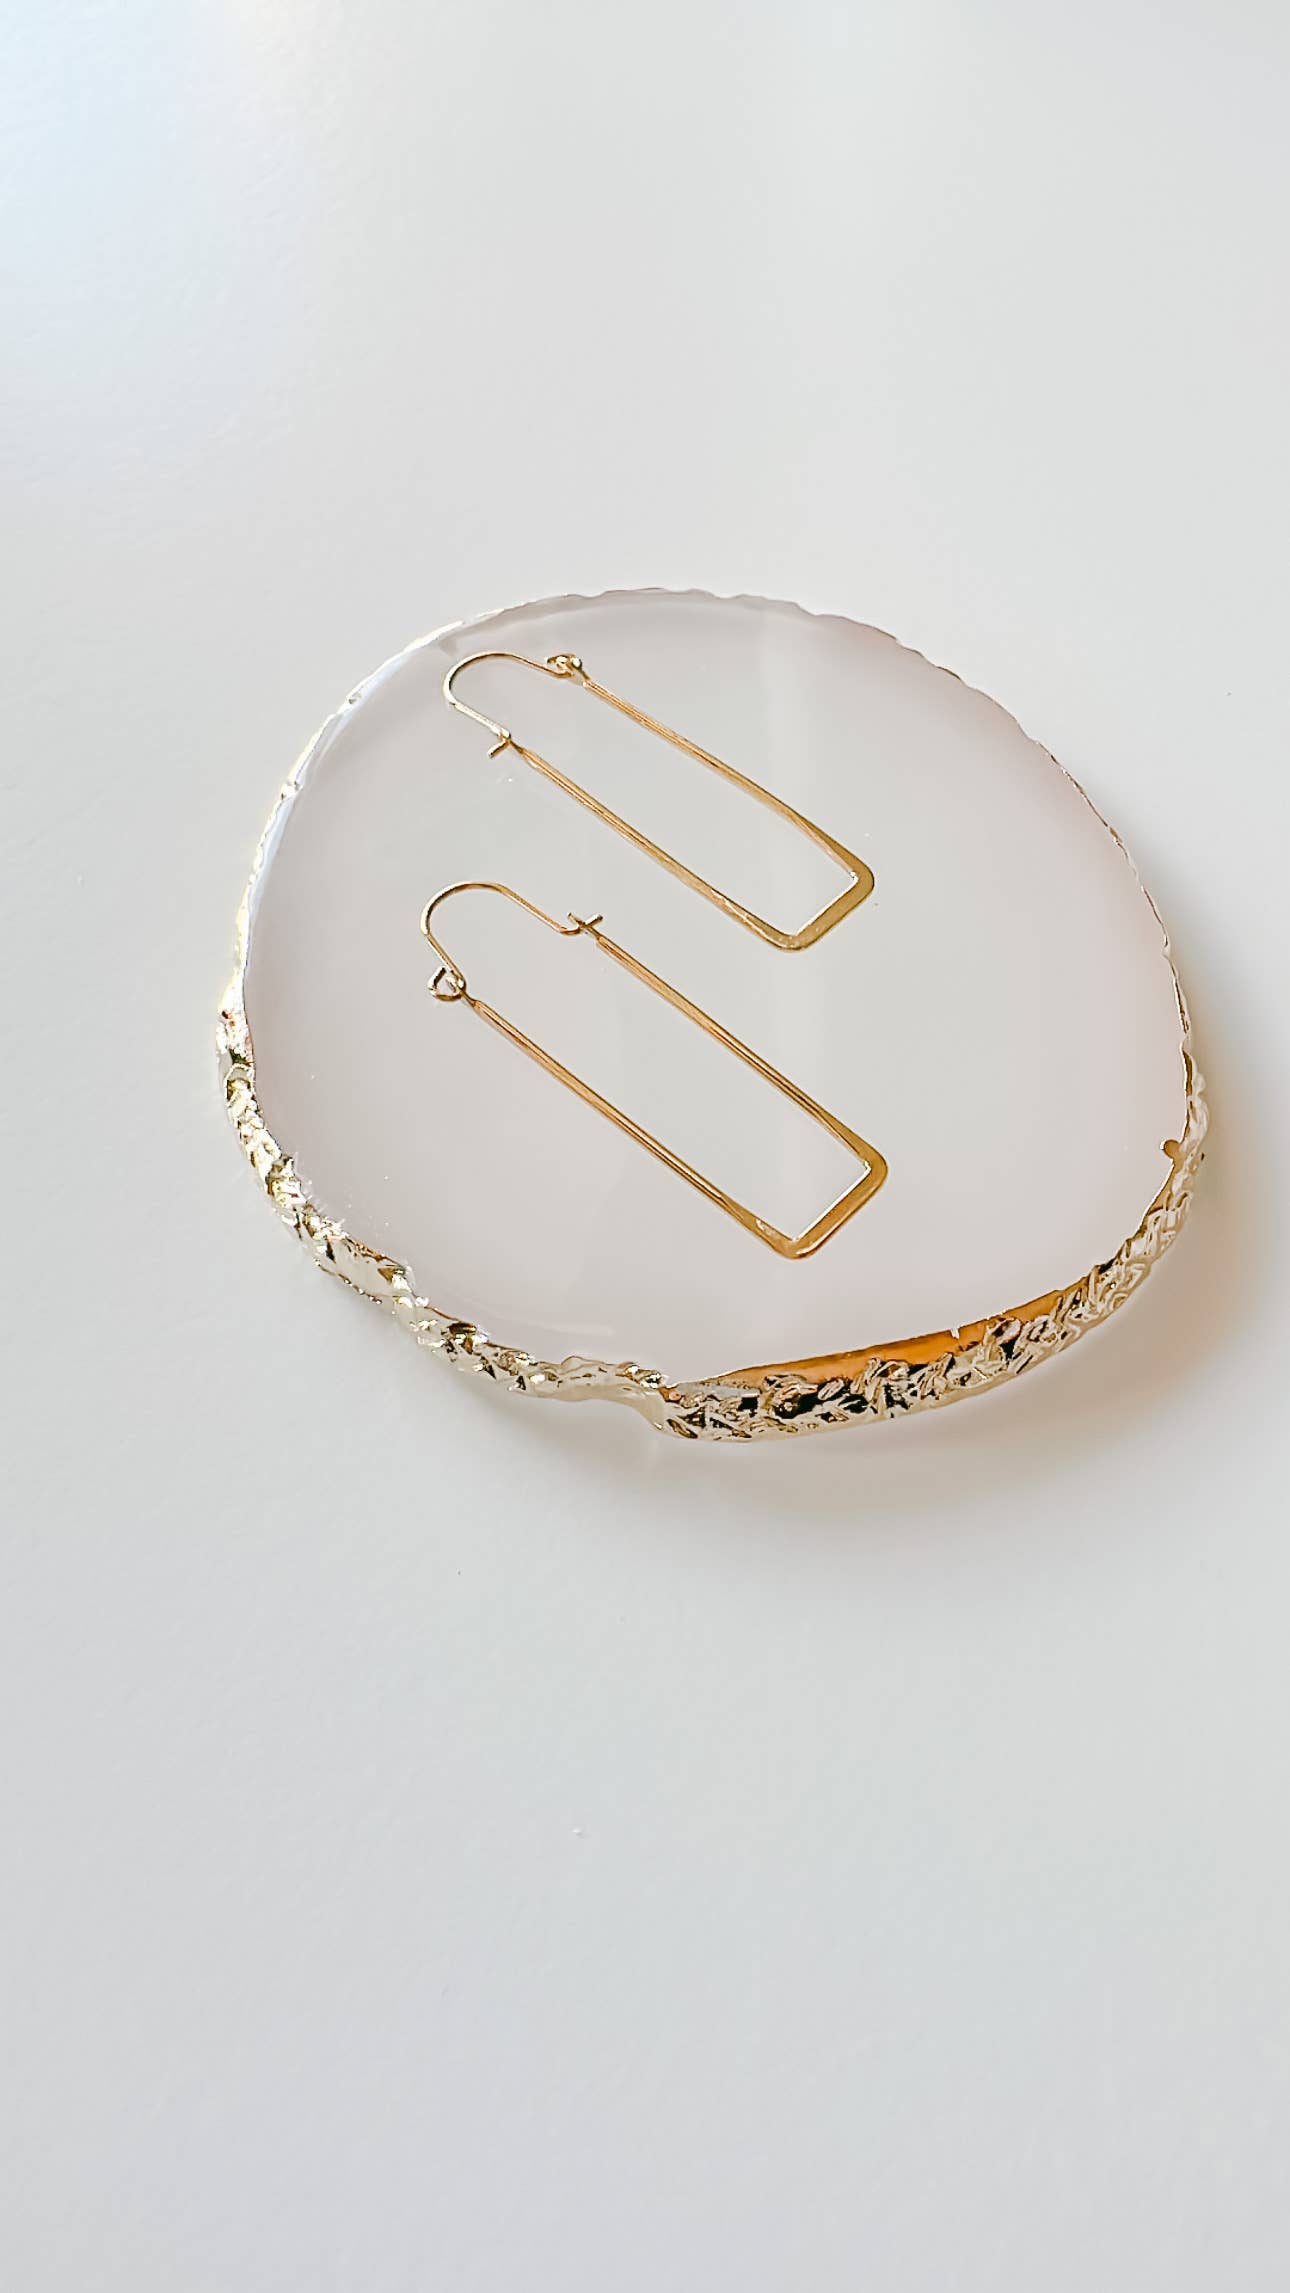 The Katie 18k gold plated earrings